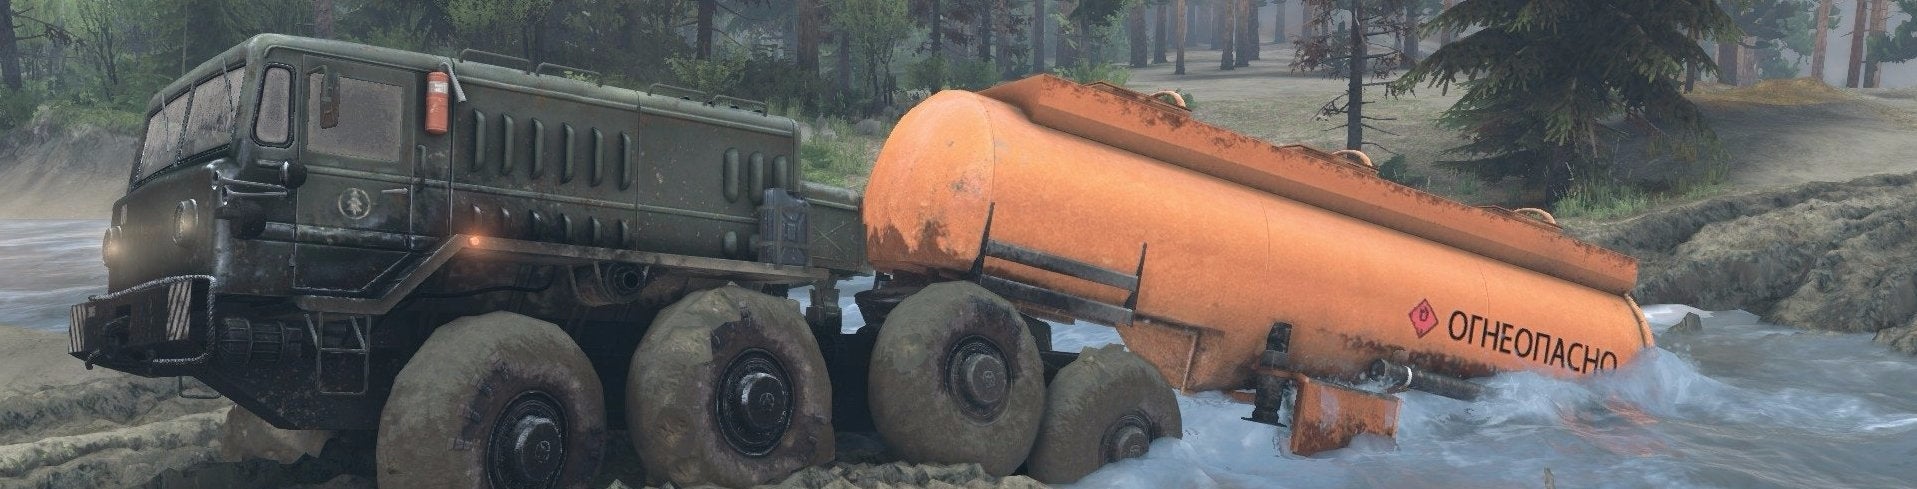 Image for The bumpy road of Spintires development